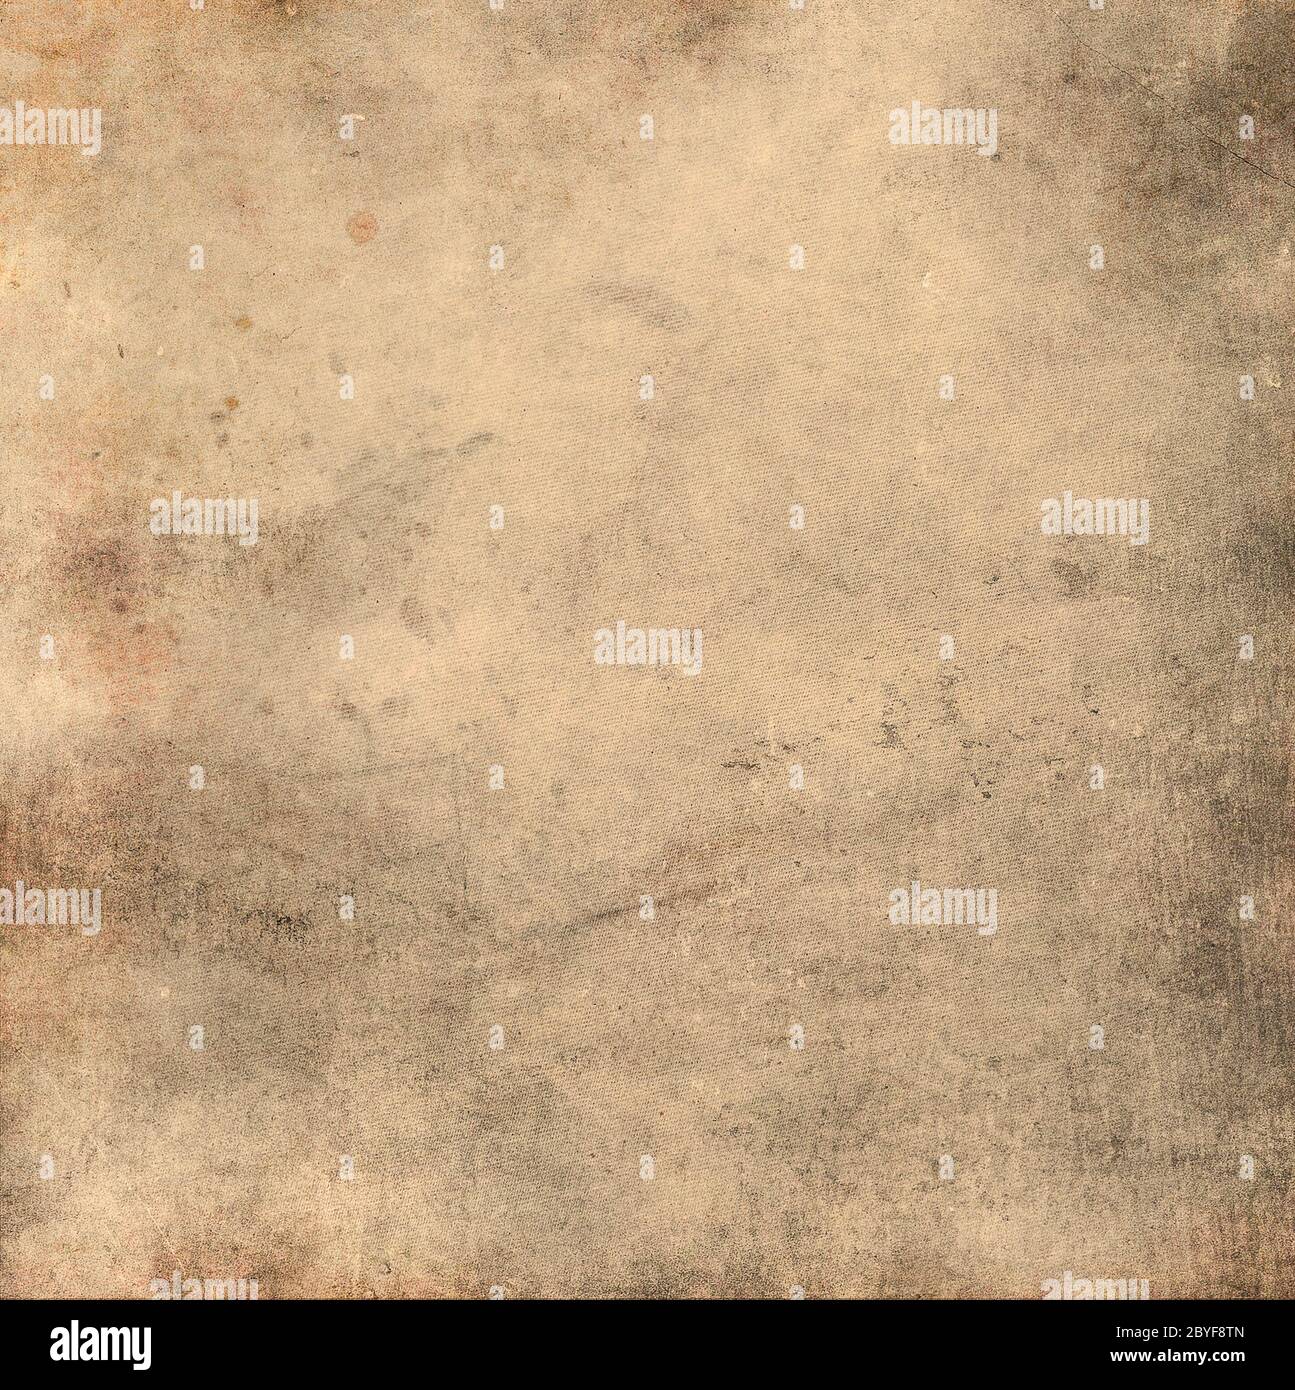 Grunge background with space for text or image Stock Photo